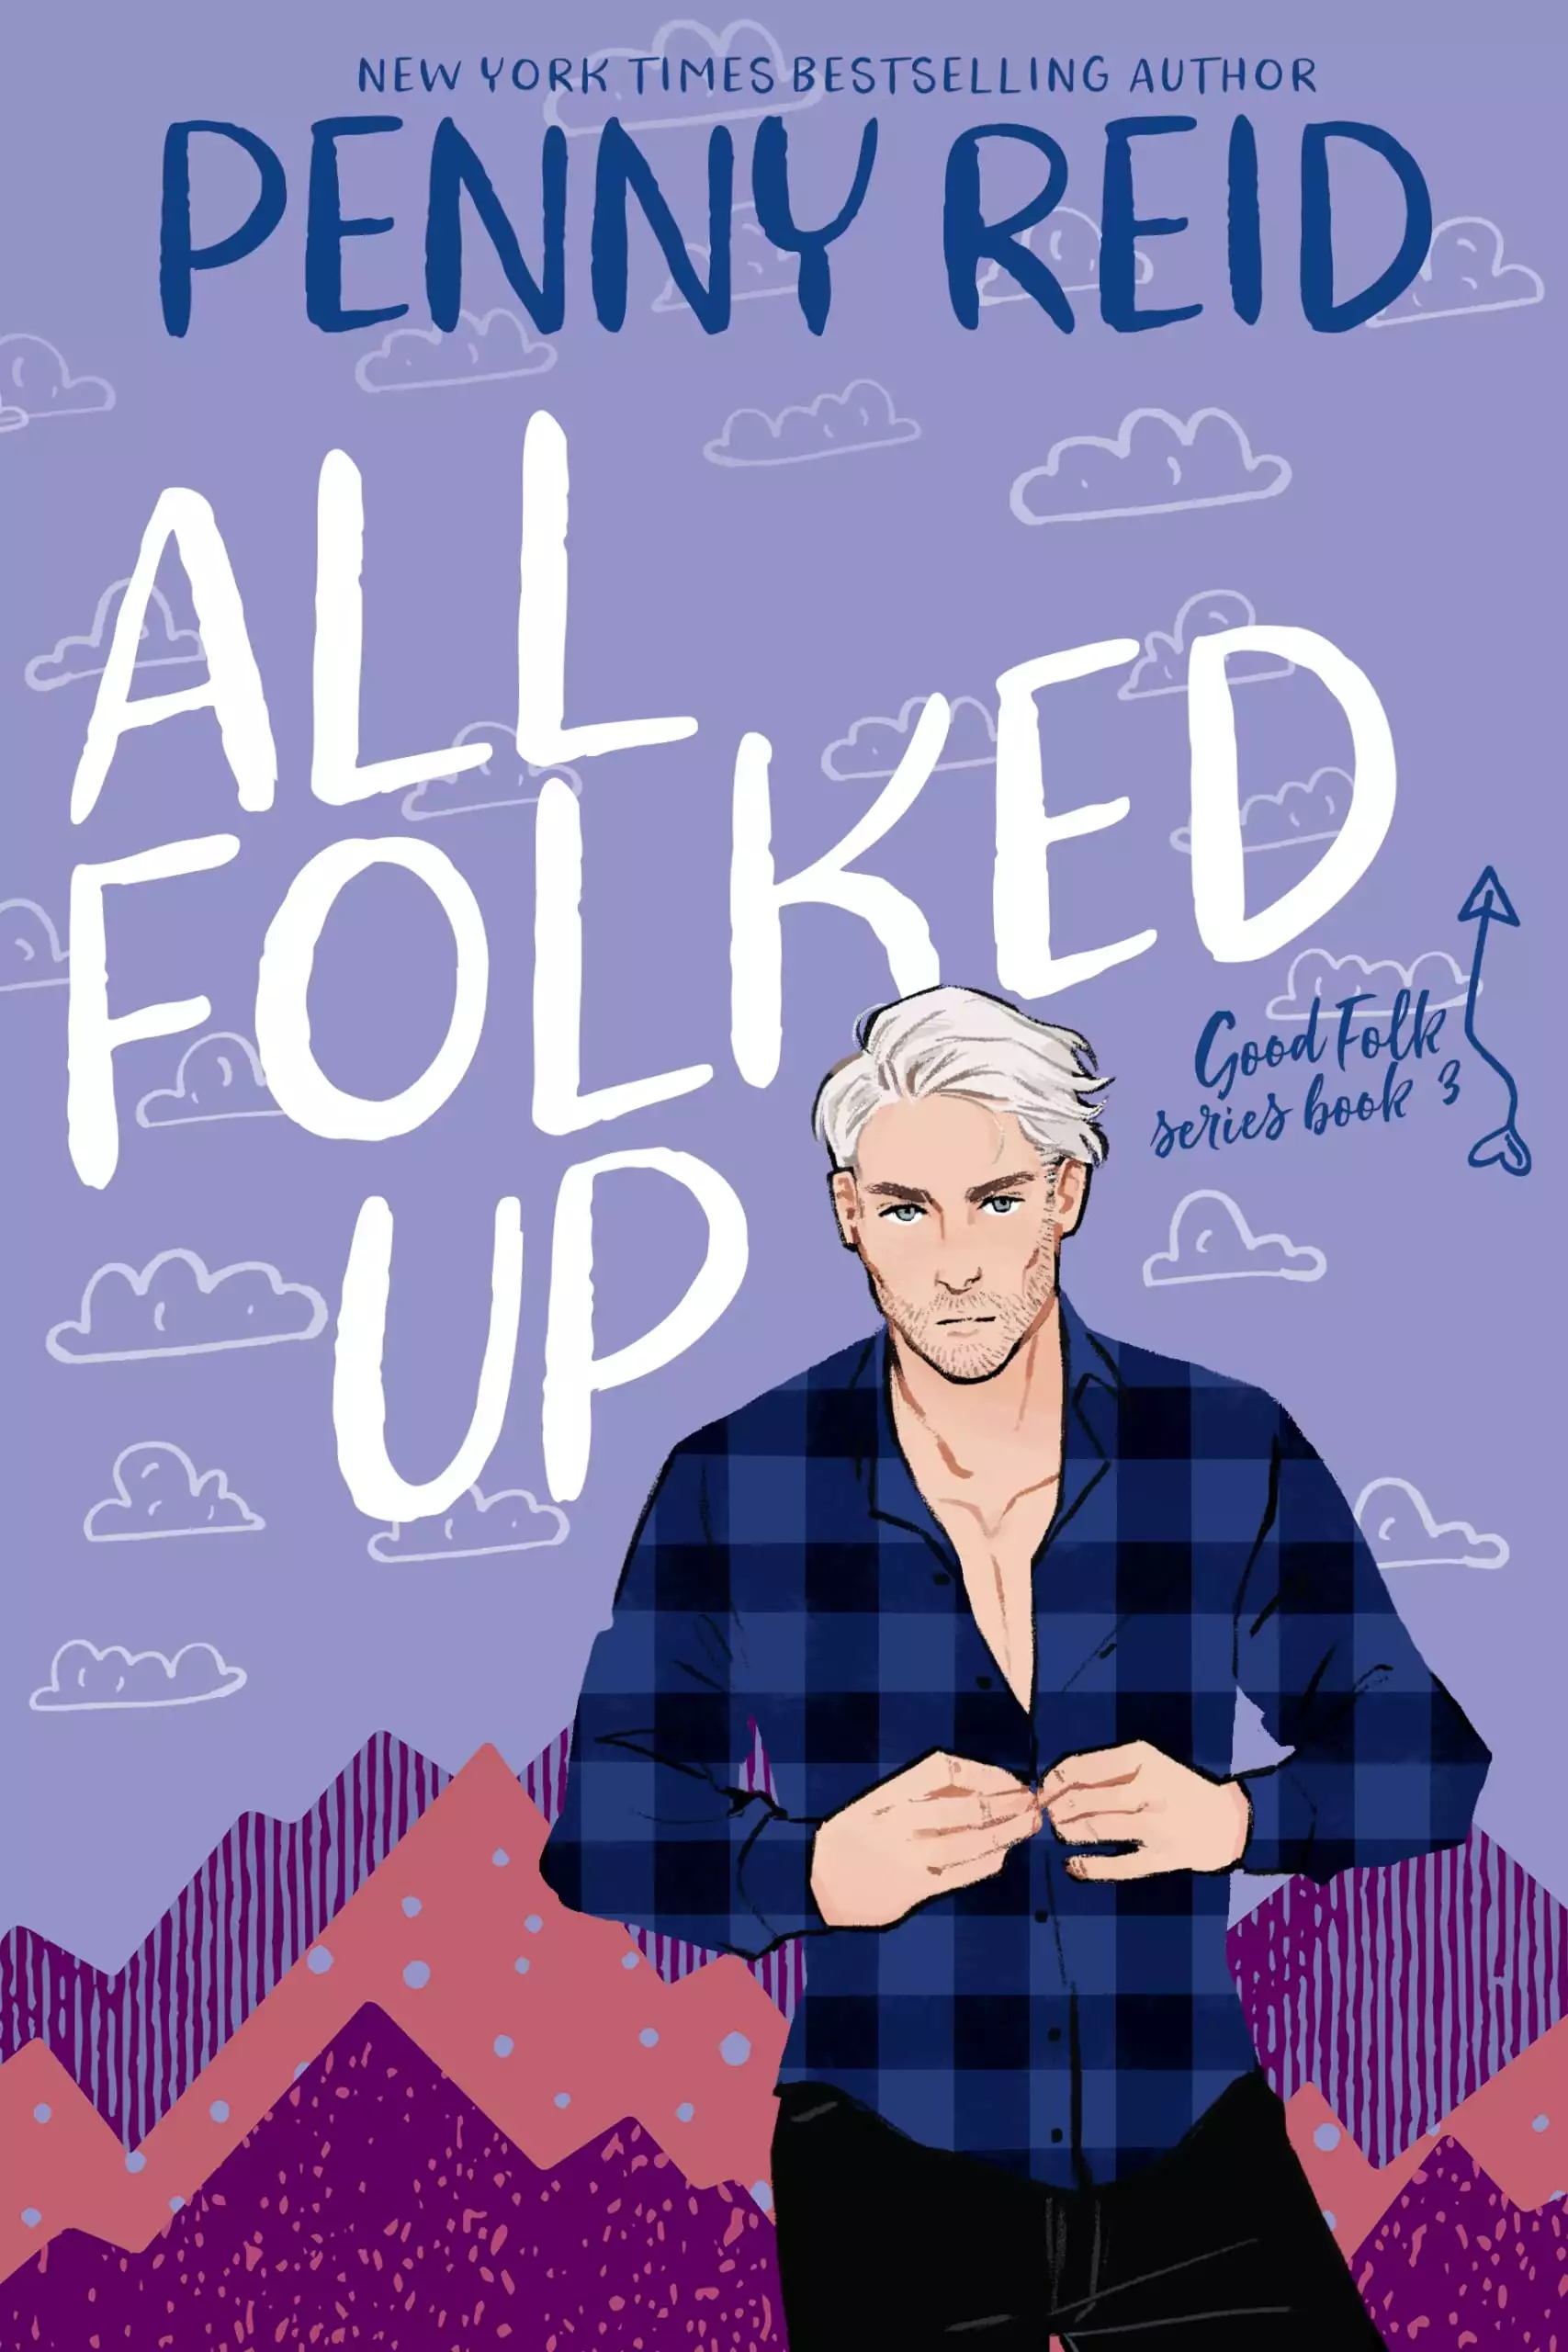 All Folked Up: A Small Town Romantic Comedy